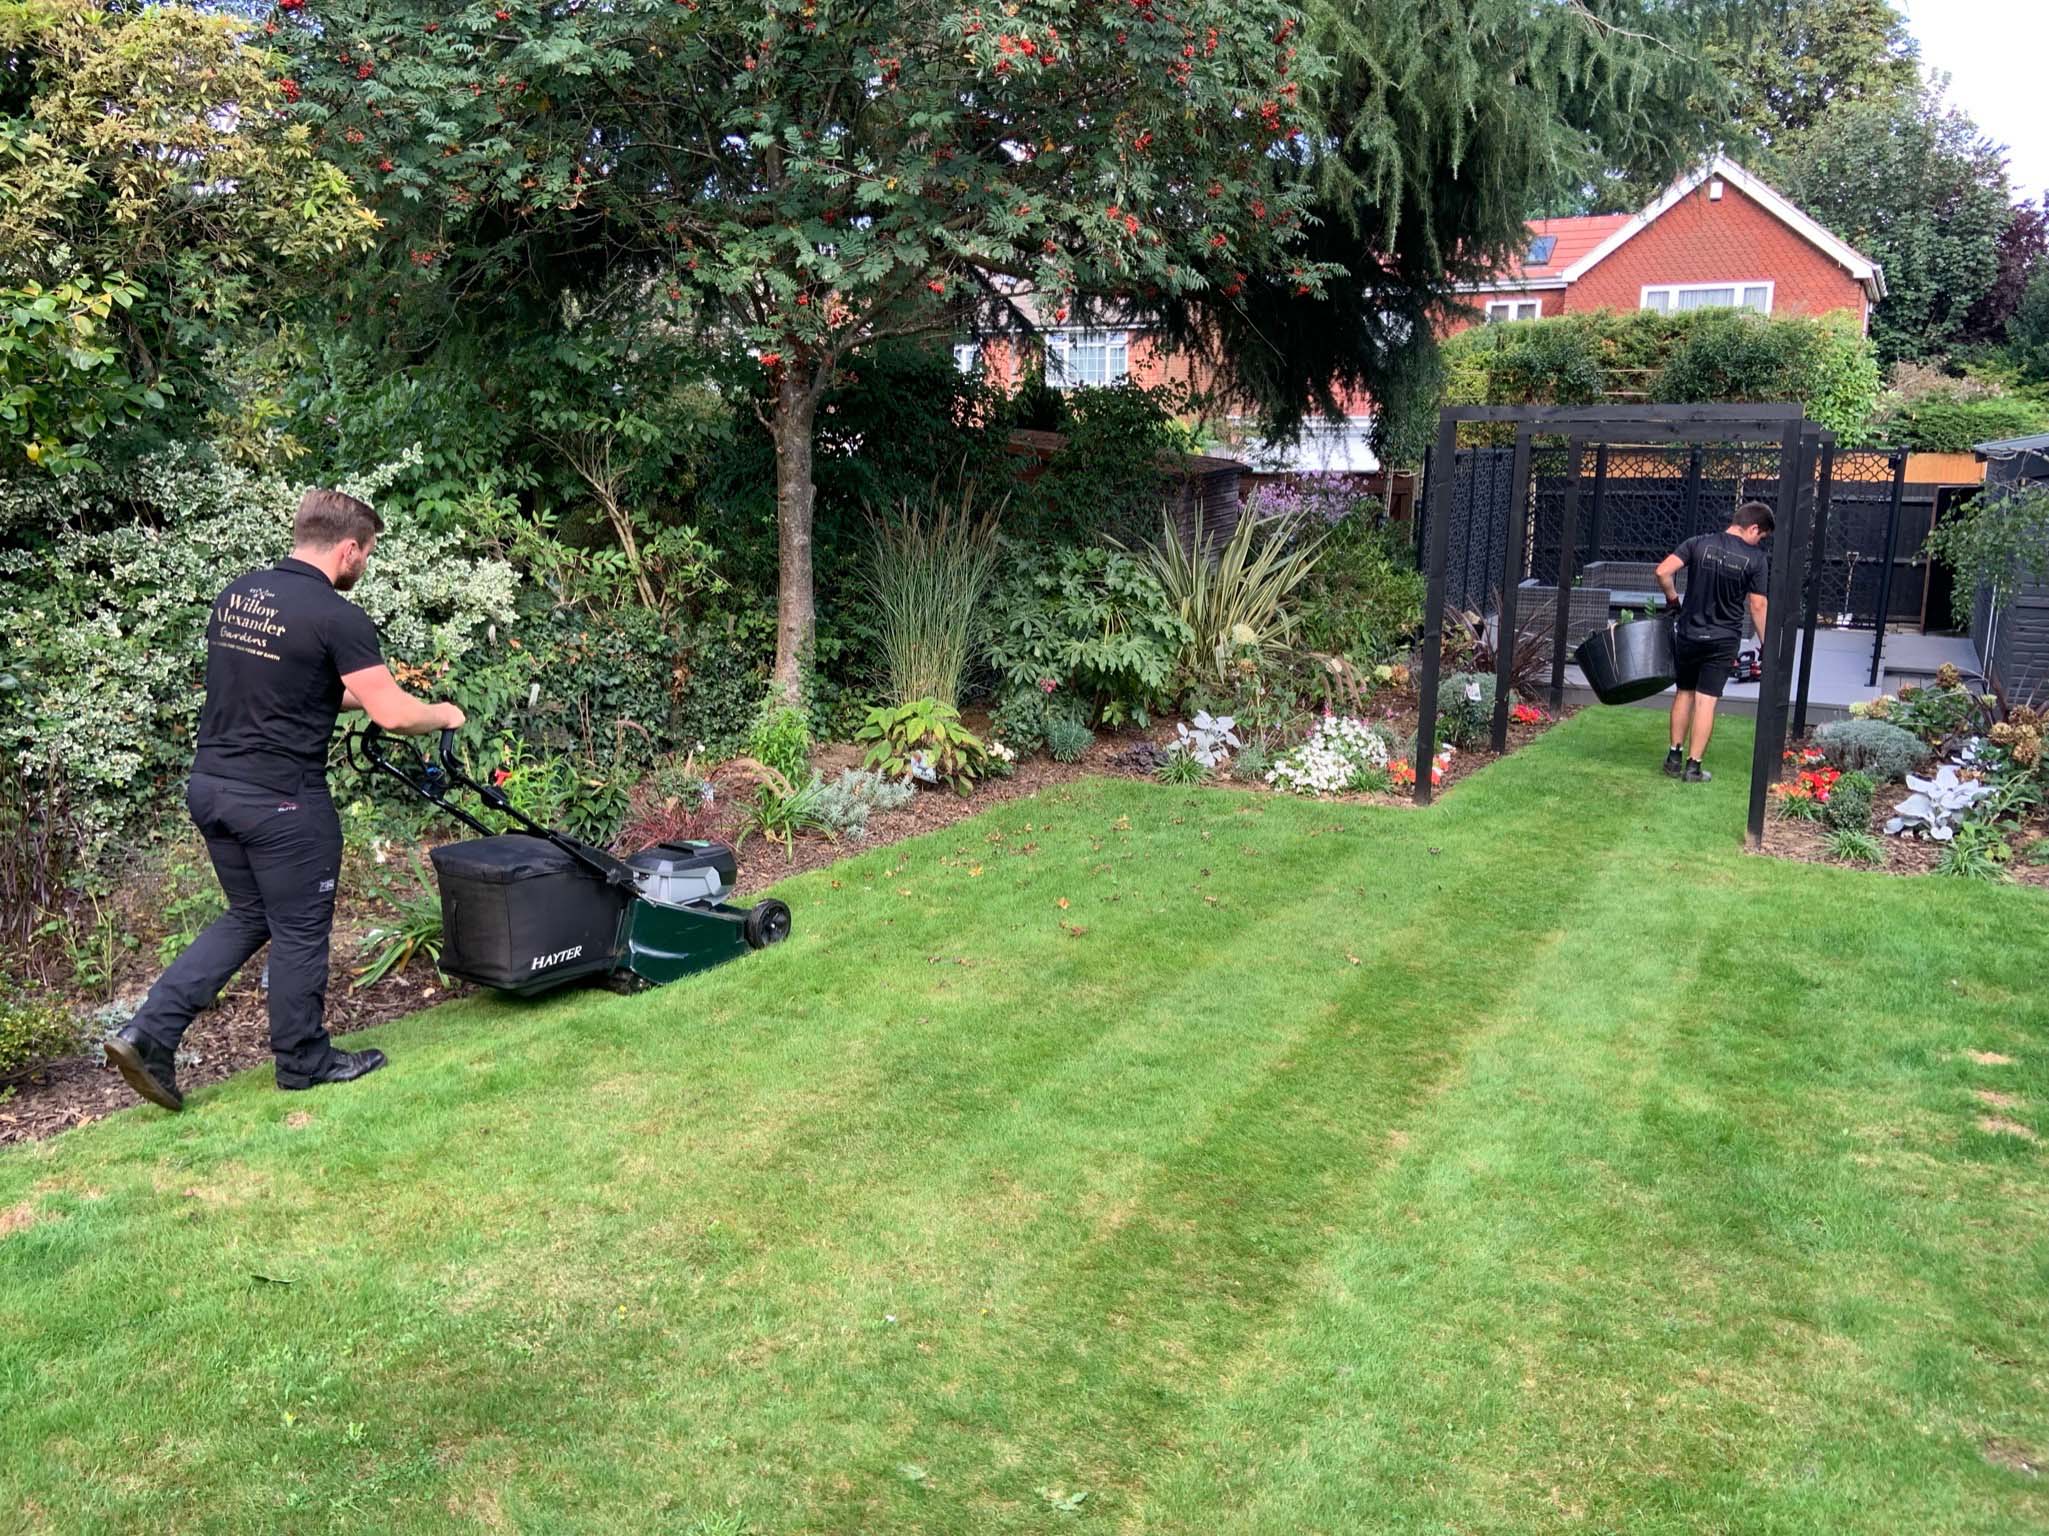 One of the Willow Alexander Gardens team mowing a lawn